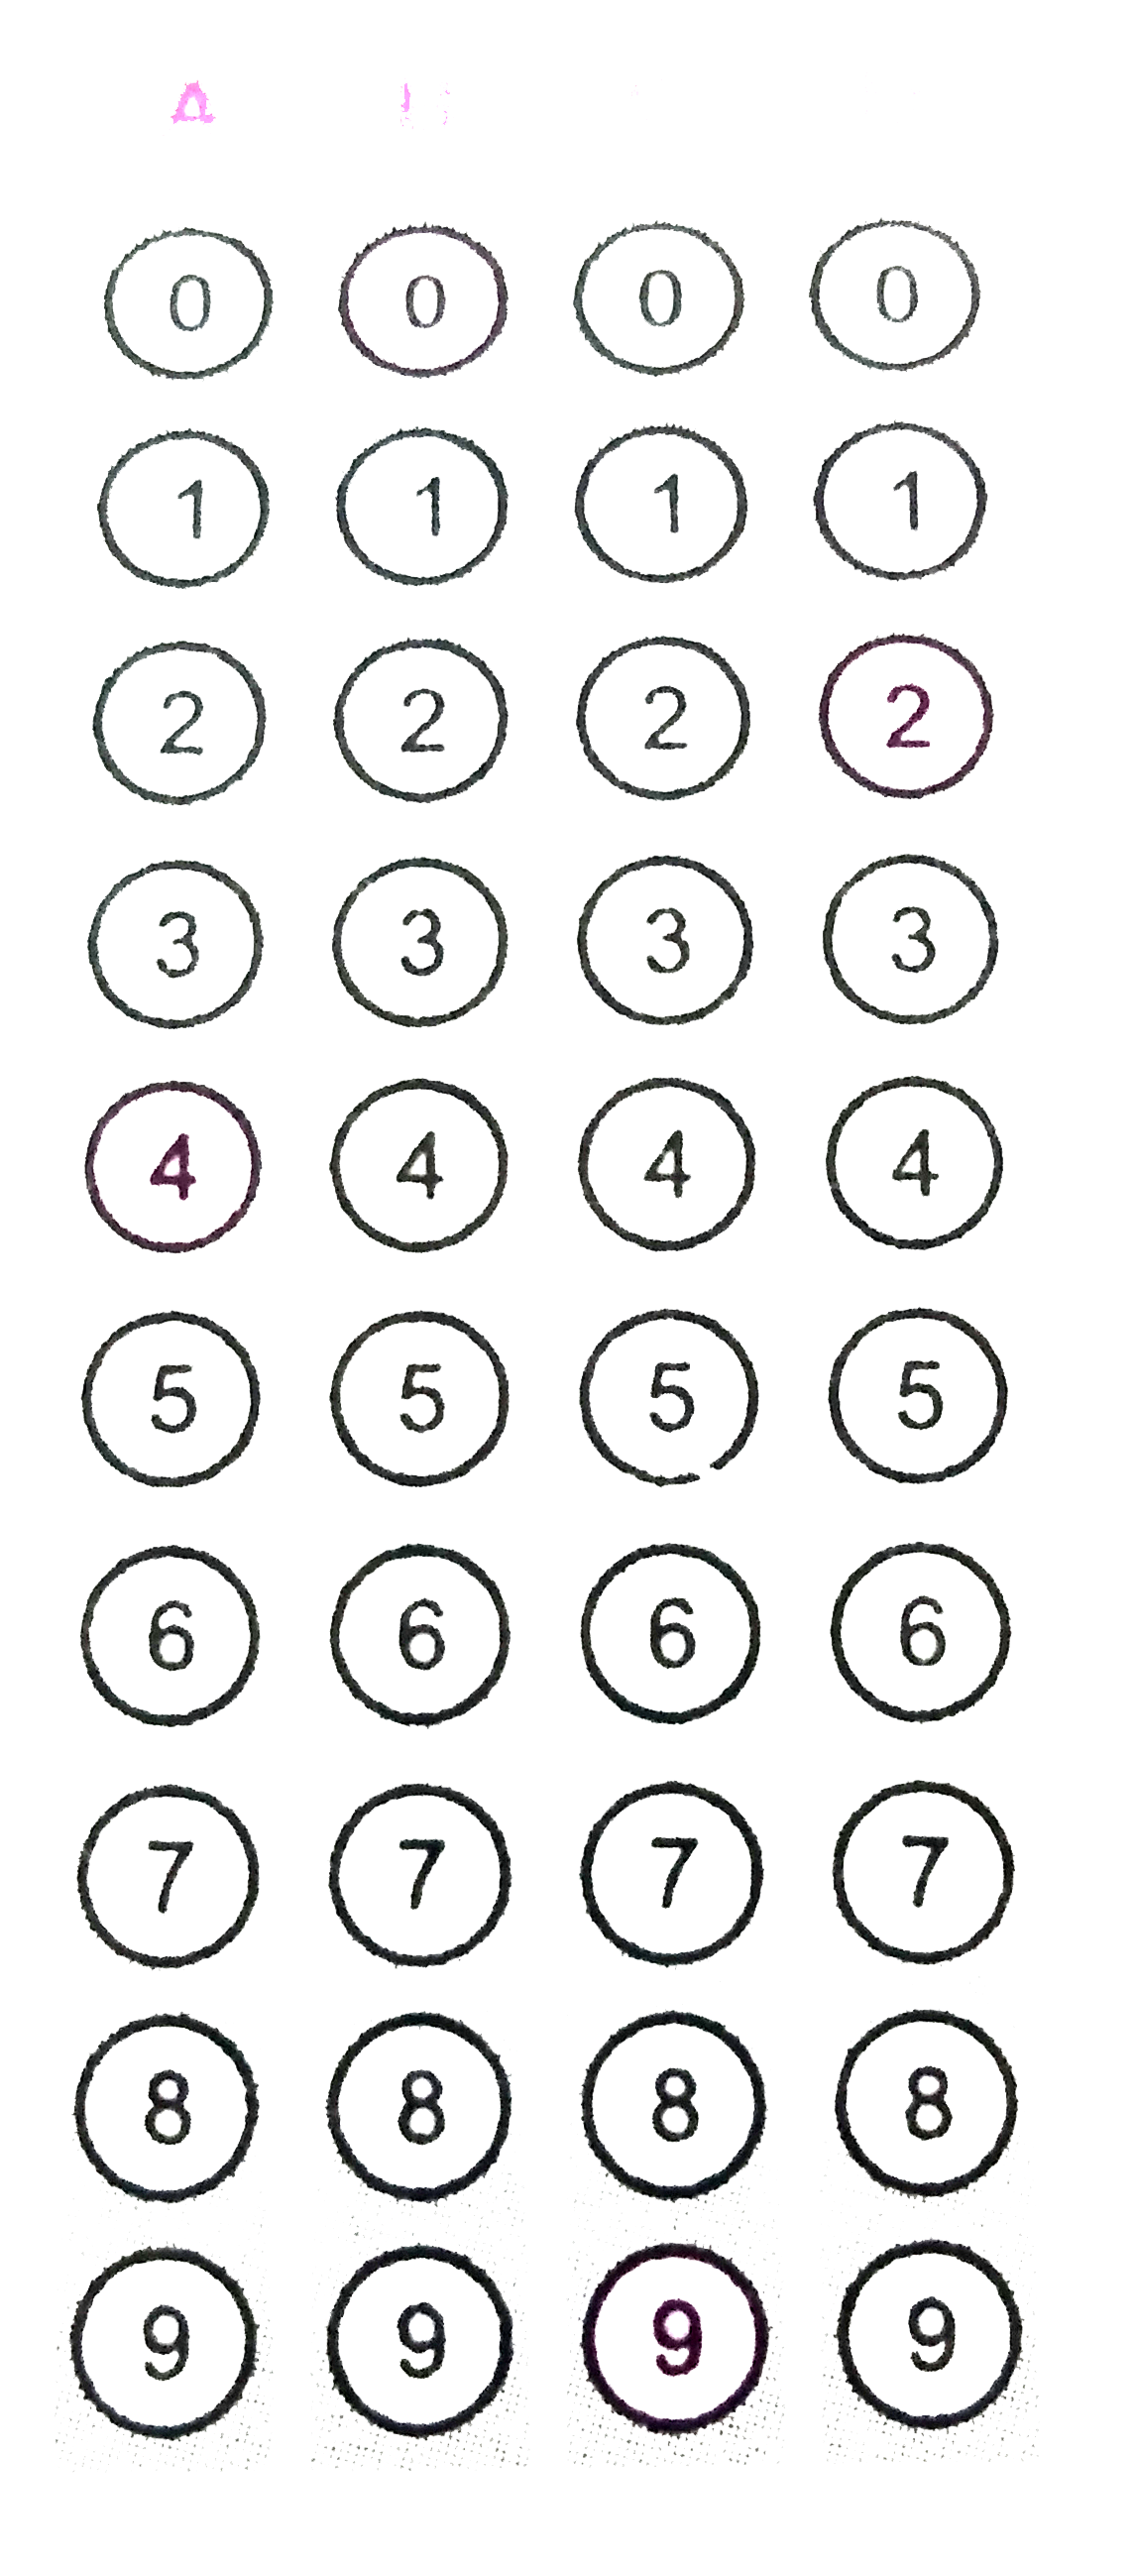 The answer to each of the following question is a single digit integer, ranging from 0 to 9. If the correct answers to the question numbers A, B, C and D (say) are 4, 0, 9 and 2 respectively, then the correct darkening of bubbles should be as shown on the side:      Among the following, the number of elements showing only one non-zero oxidation state is   O, Cl, F, N, P, Sn, Tl, Na, Ti